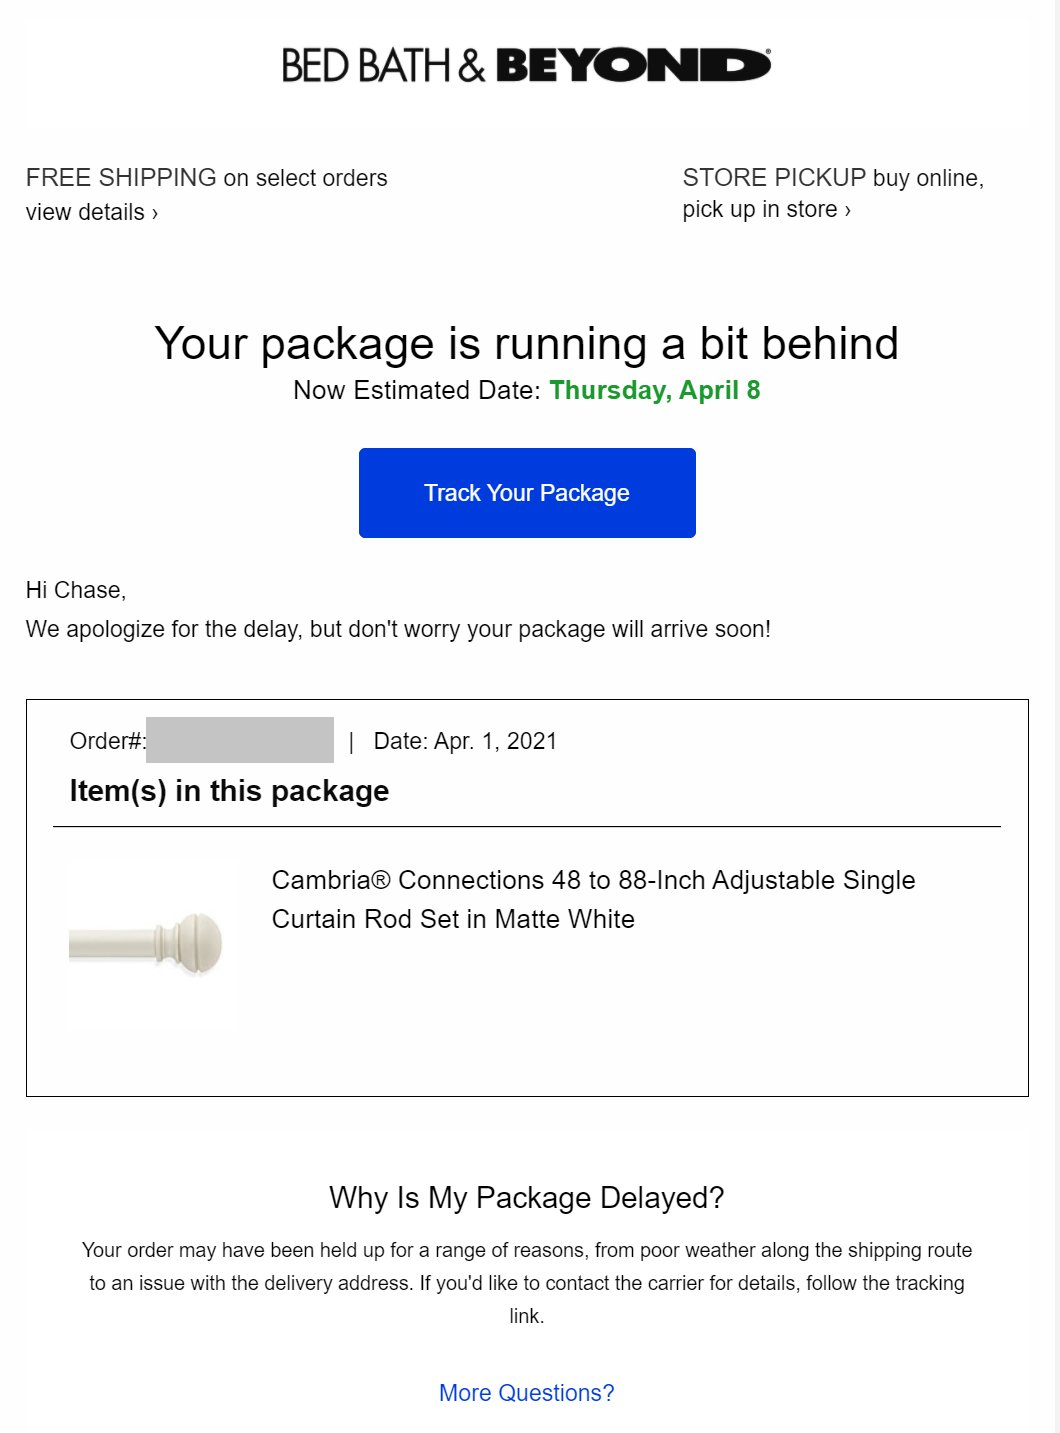 Bed Bath & Beyond Delayed Shipment Notification Email Template